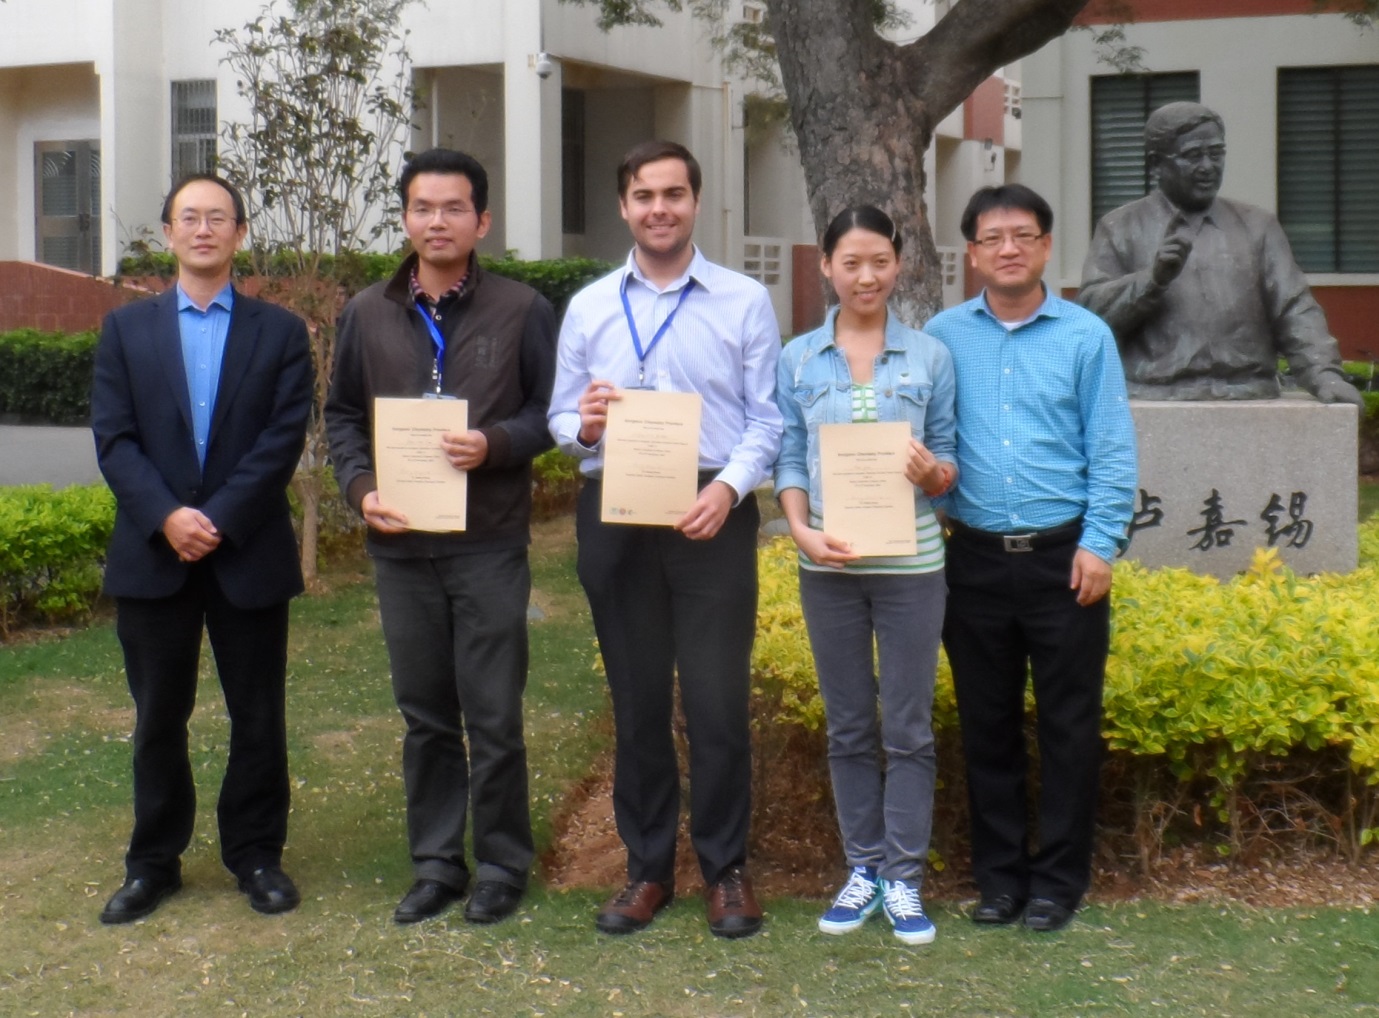 Inorganic Chemistry Frontiers Poster Prizes Awarded at the 6th